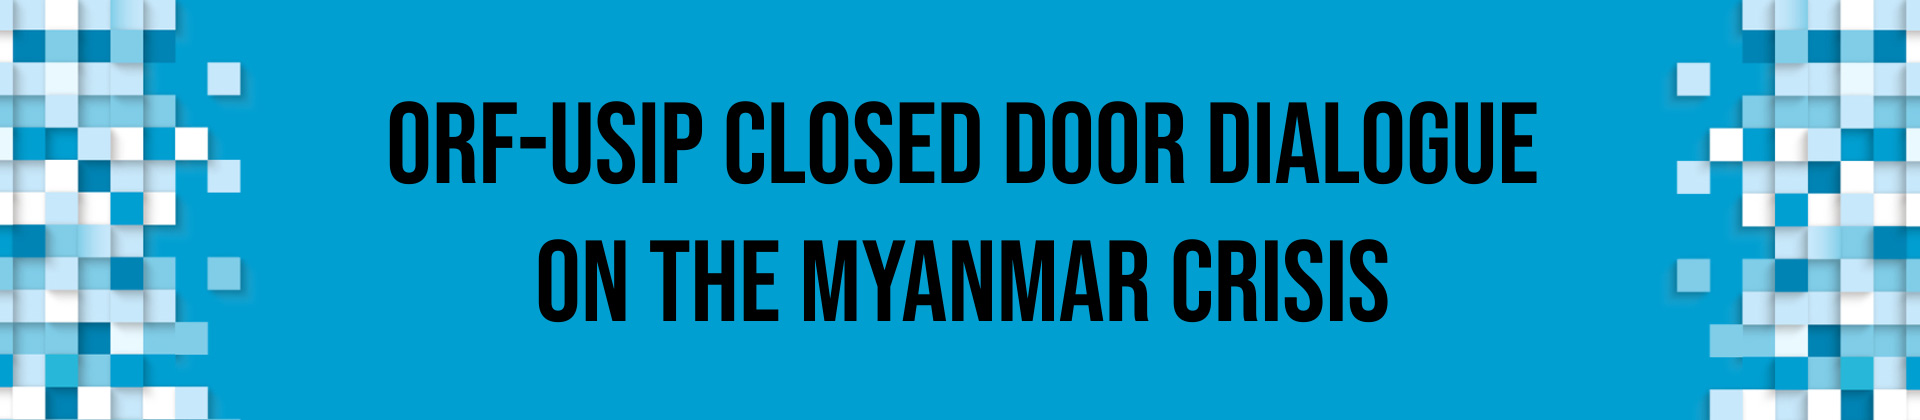 ORF-USIP Closed Door Dialogue on the Myanmar Crisis